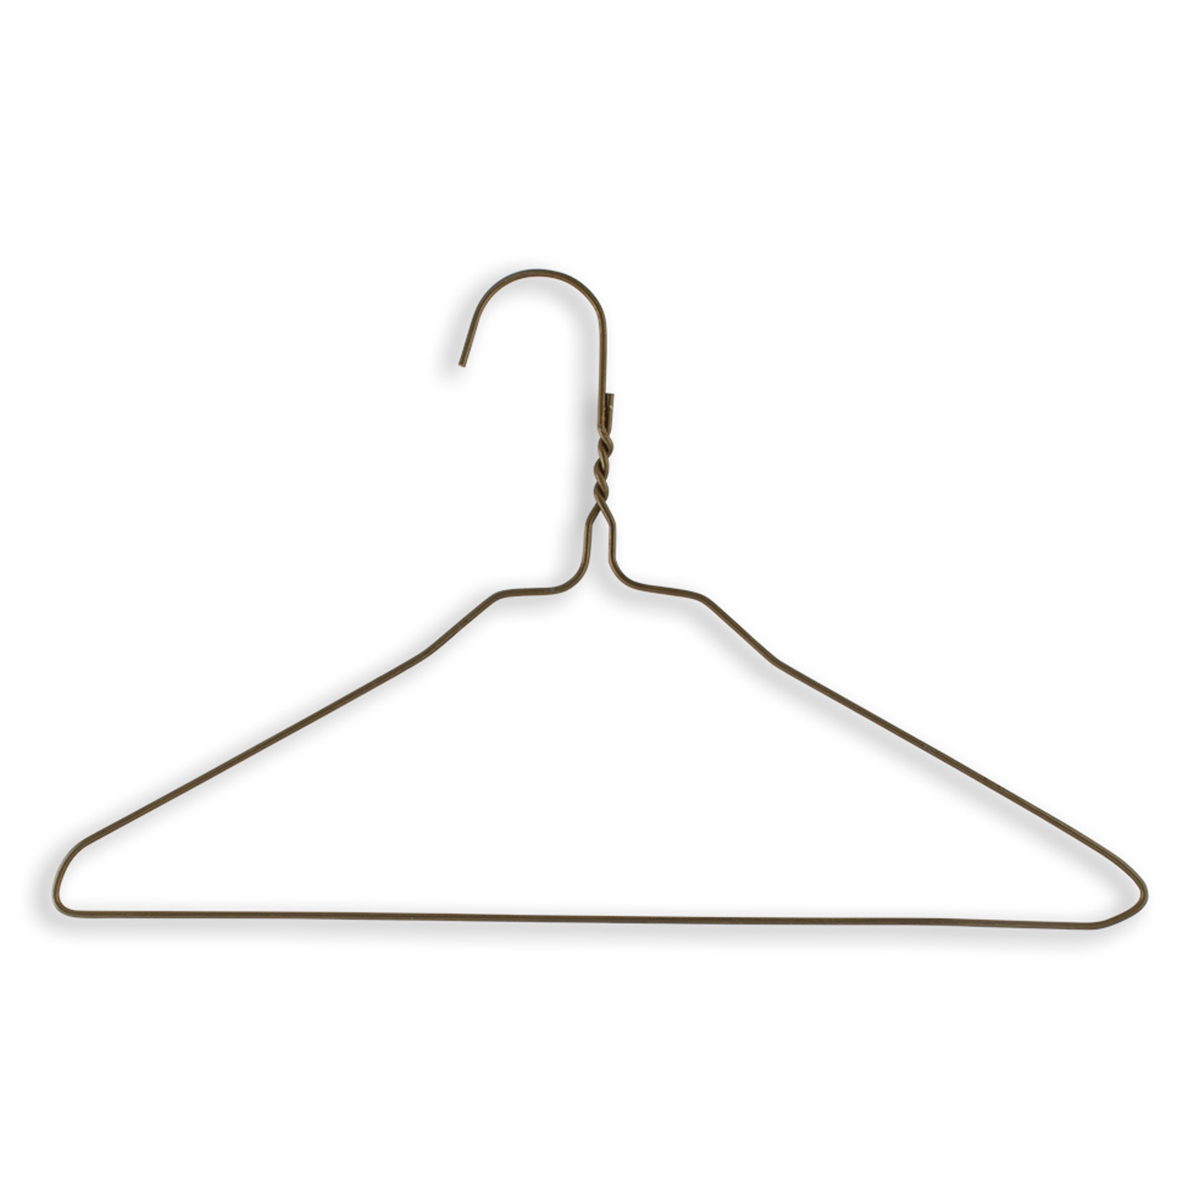 Wholesale Metal Wire Clothes Hanger High Quality Steel Aluminum Coat Hanger  for Kid - China Hanger and Hangers price